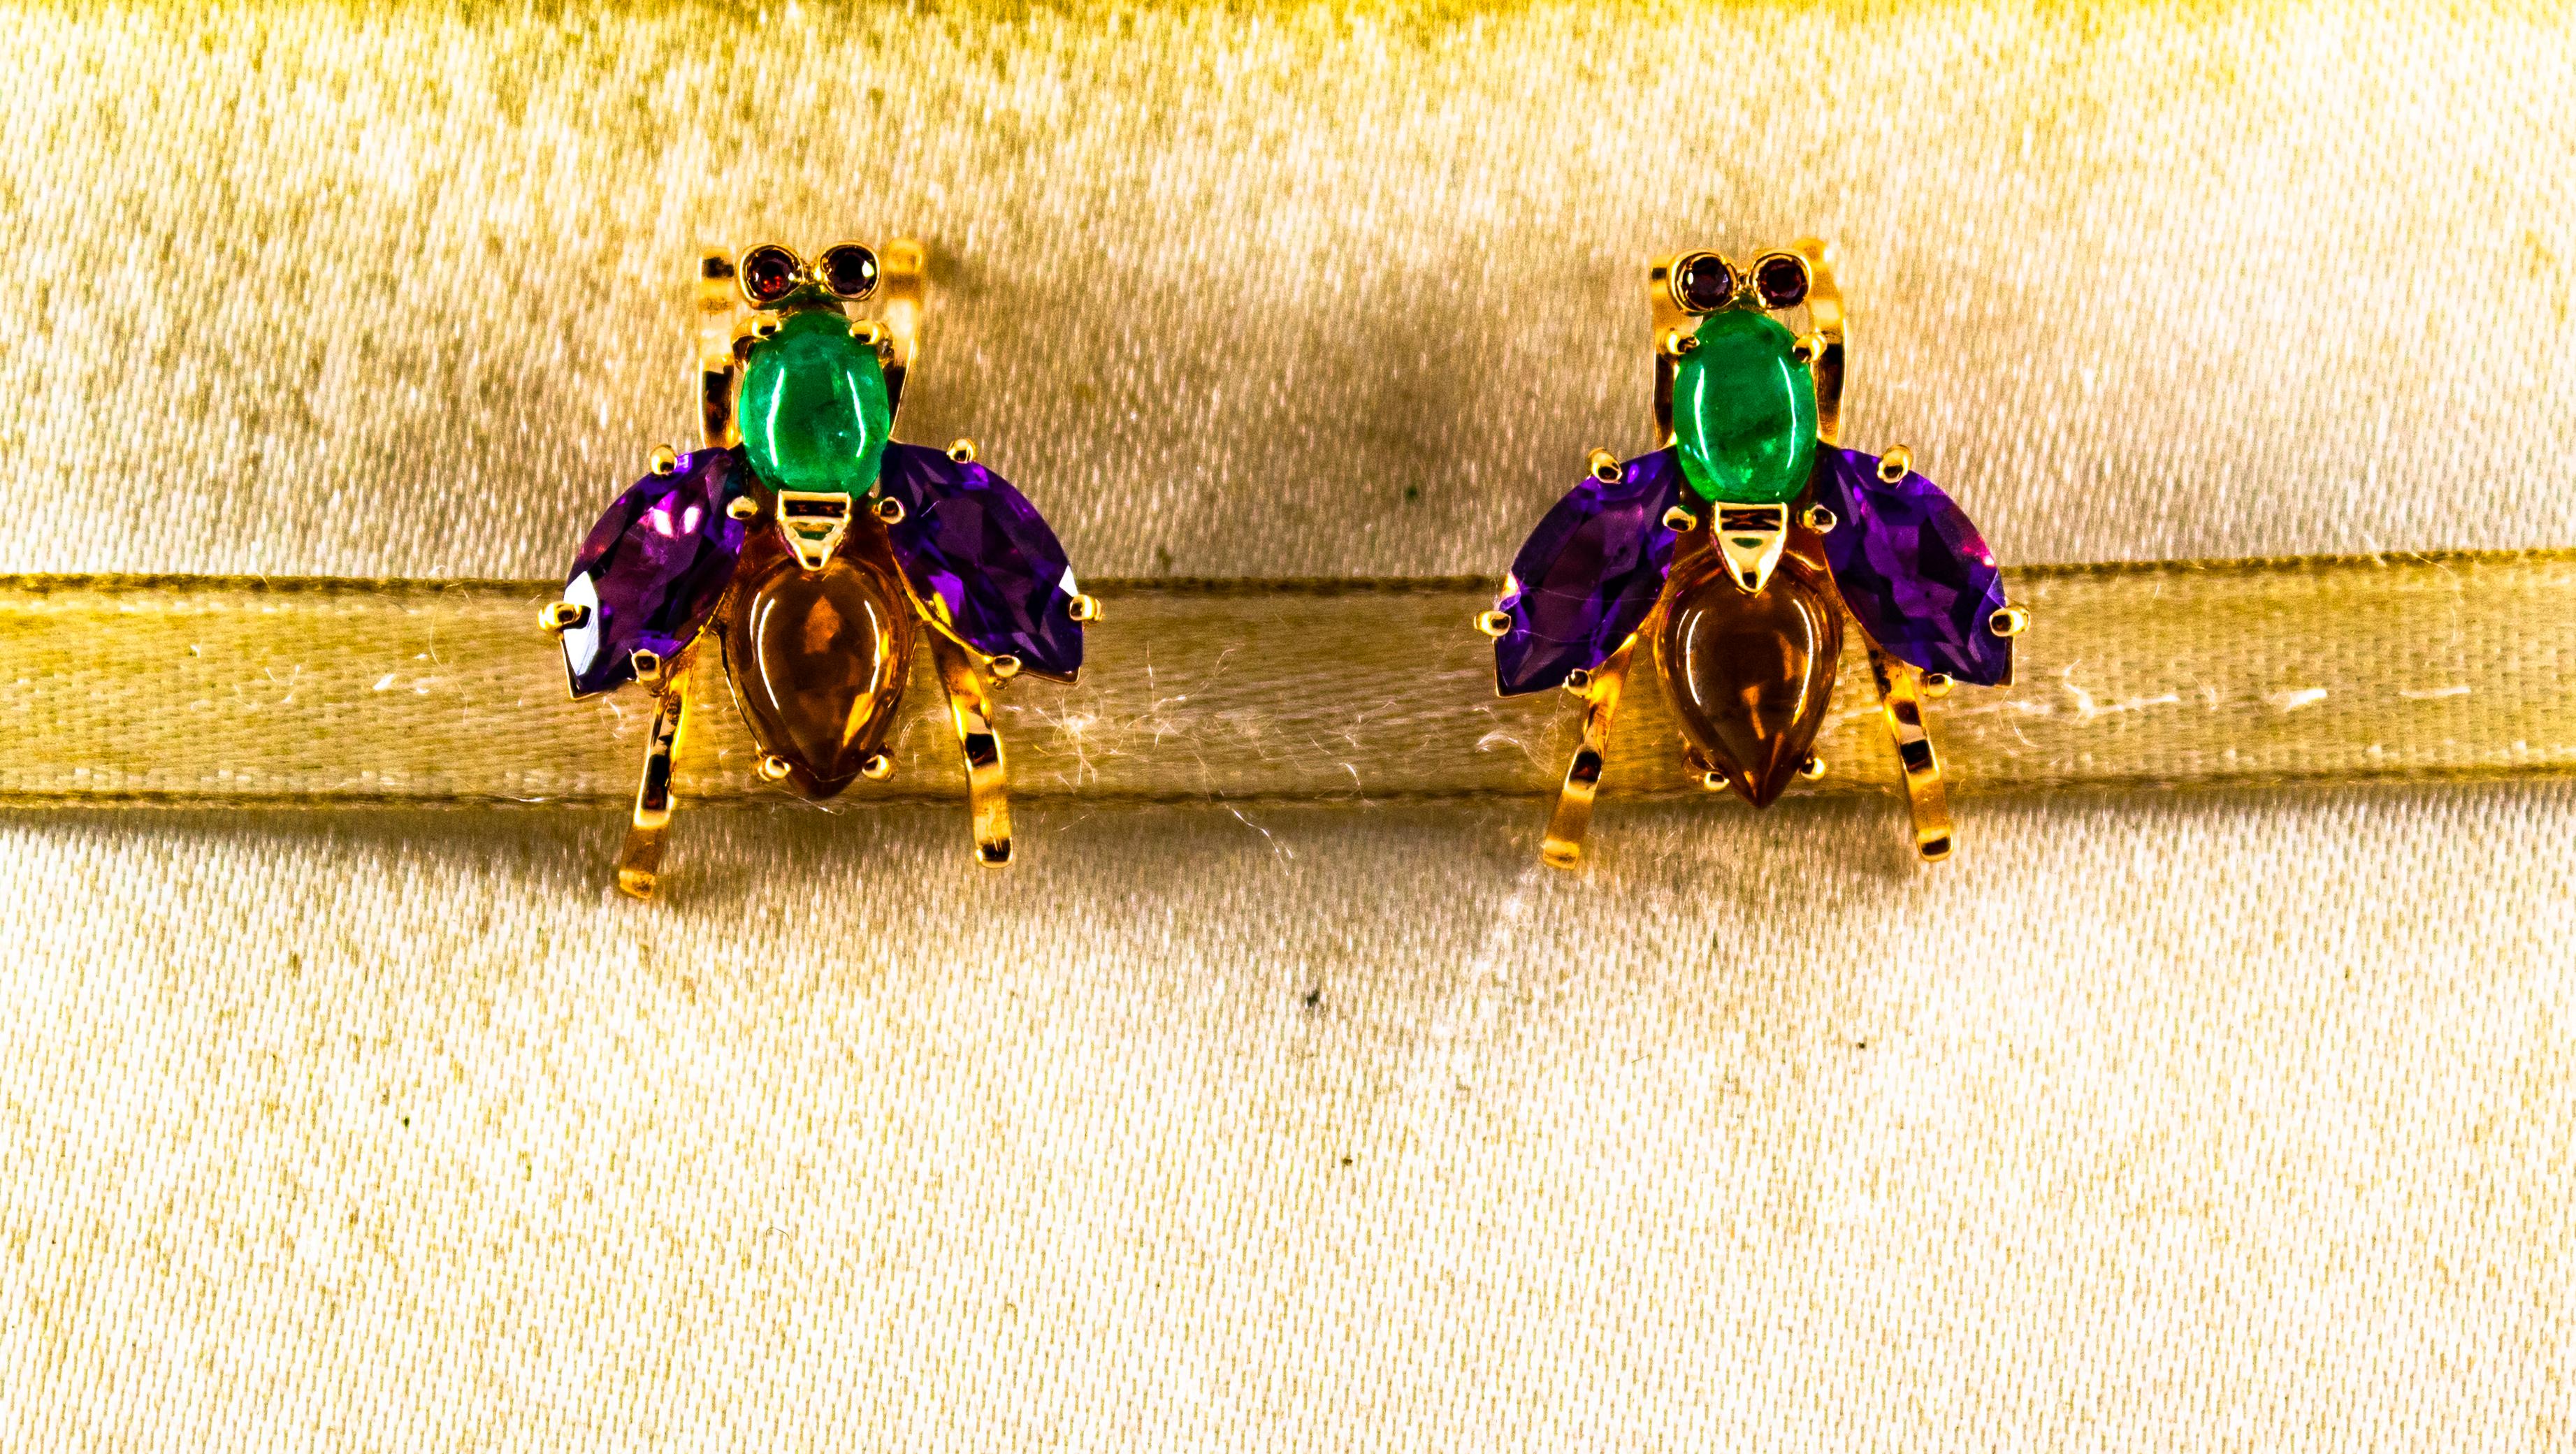 These Stud Earrings are made of 14K Yellow Gold.
These Earrings have 0.08 Carats of Rubies.
These Earrings have 0.90 Carats of Emeralds.
These Earrings have 2.00 Carats of Citrine.
These Earrings have 3.00 Carats of Amethyst.

These Earrings are